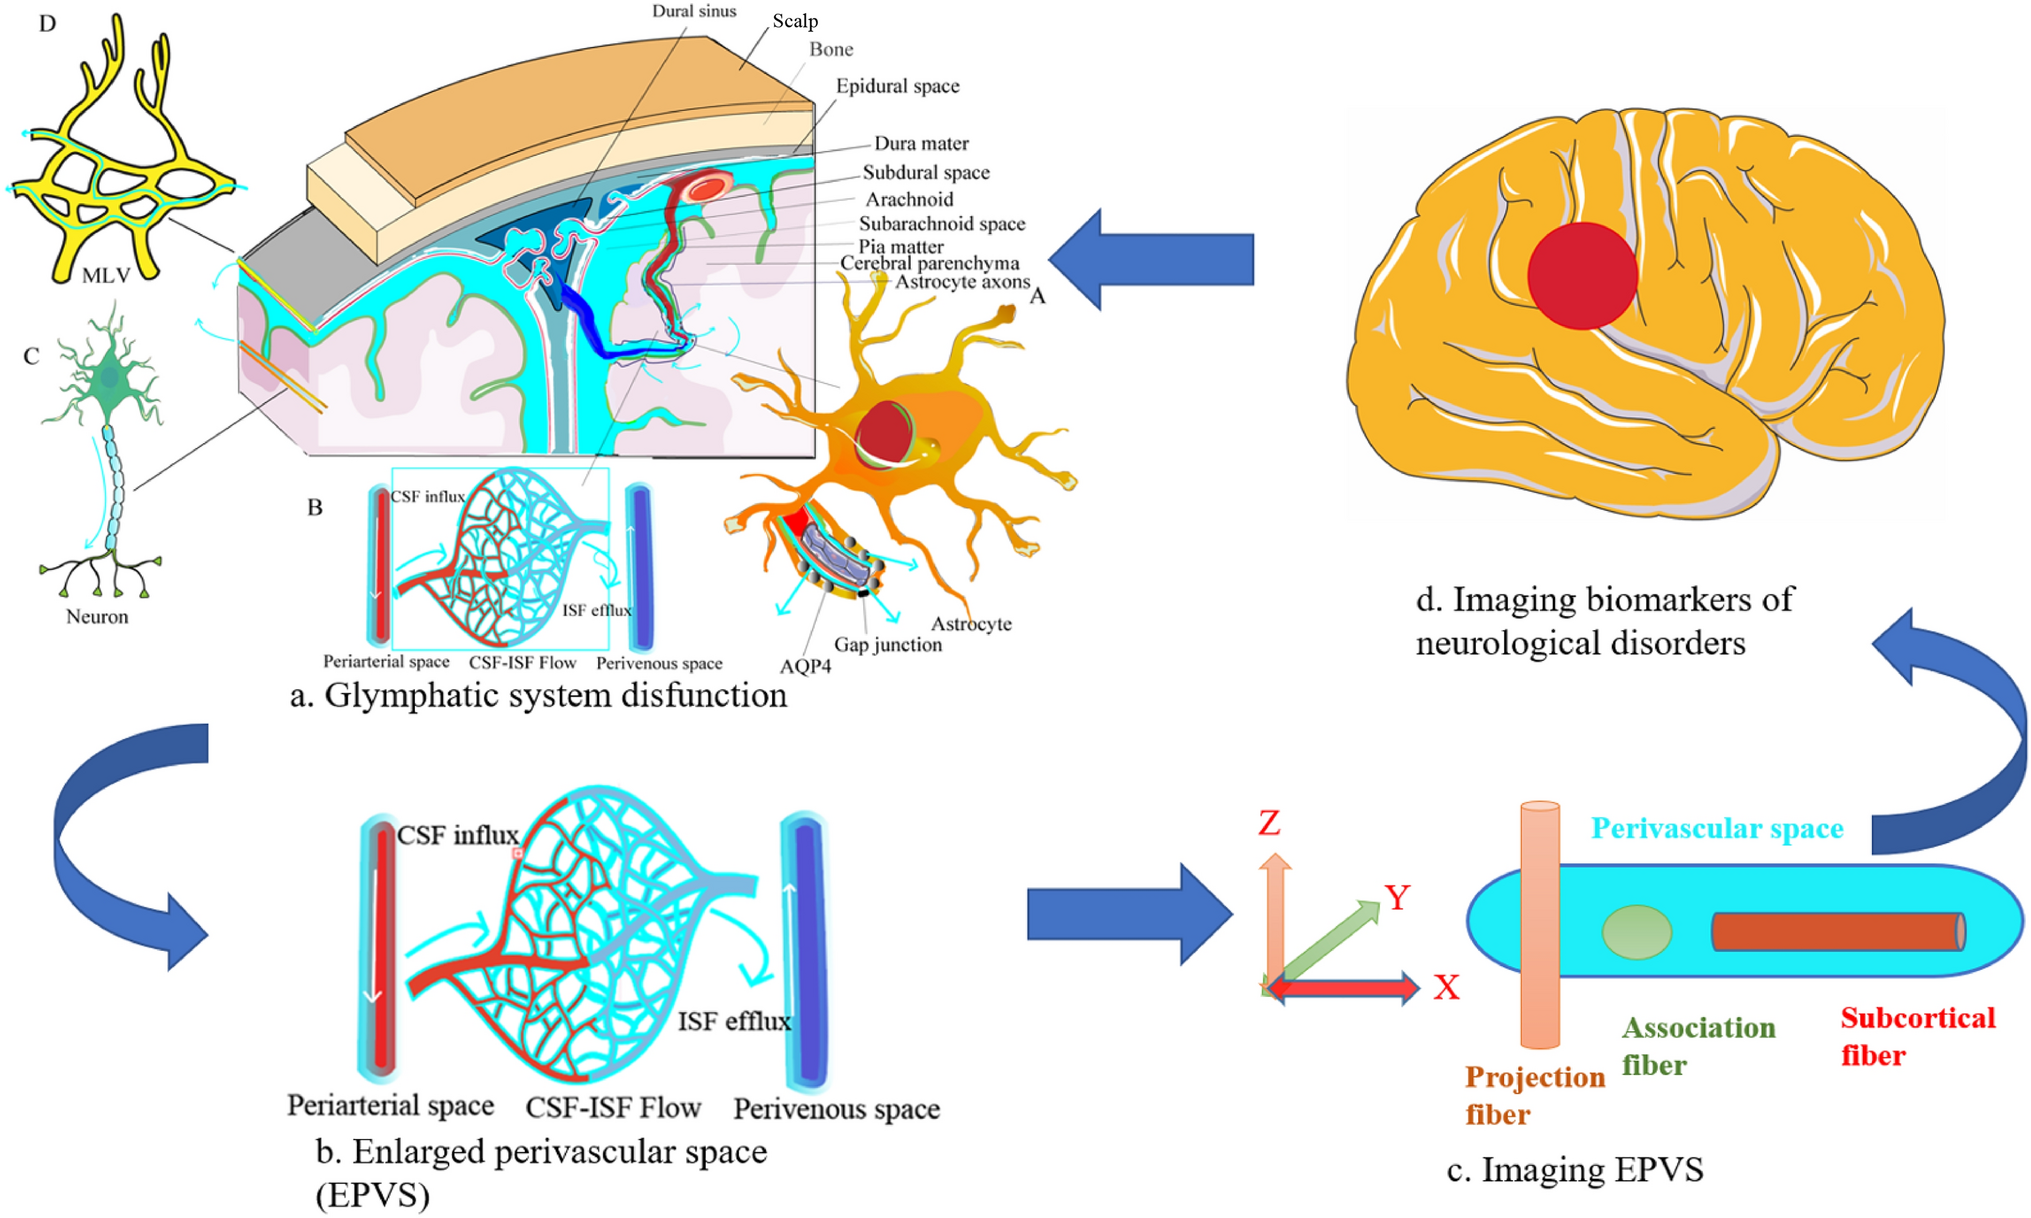 Enlarged Perivascular Space and Index for Diffusivity Along the Perivascular Space as Emerging Neuroimaging Biomarkers of Neurological Diseases